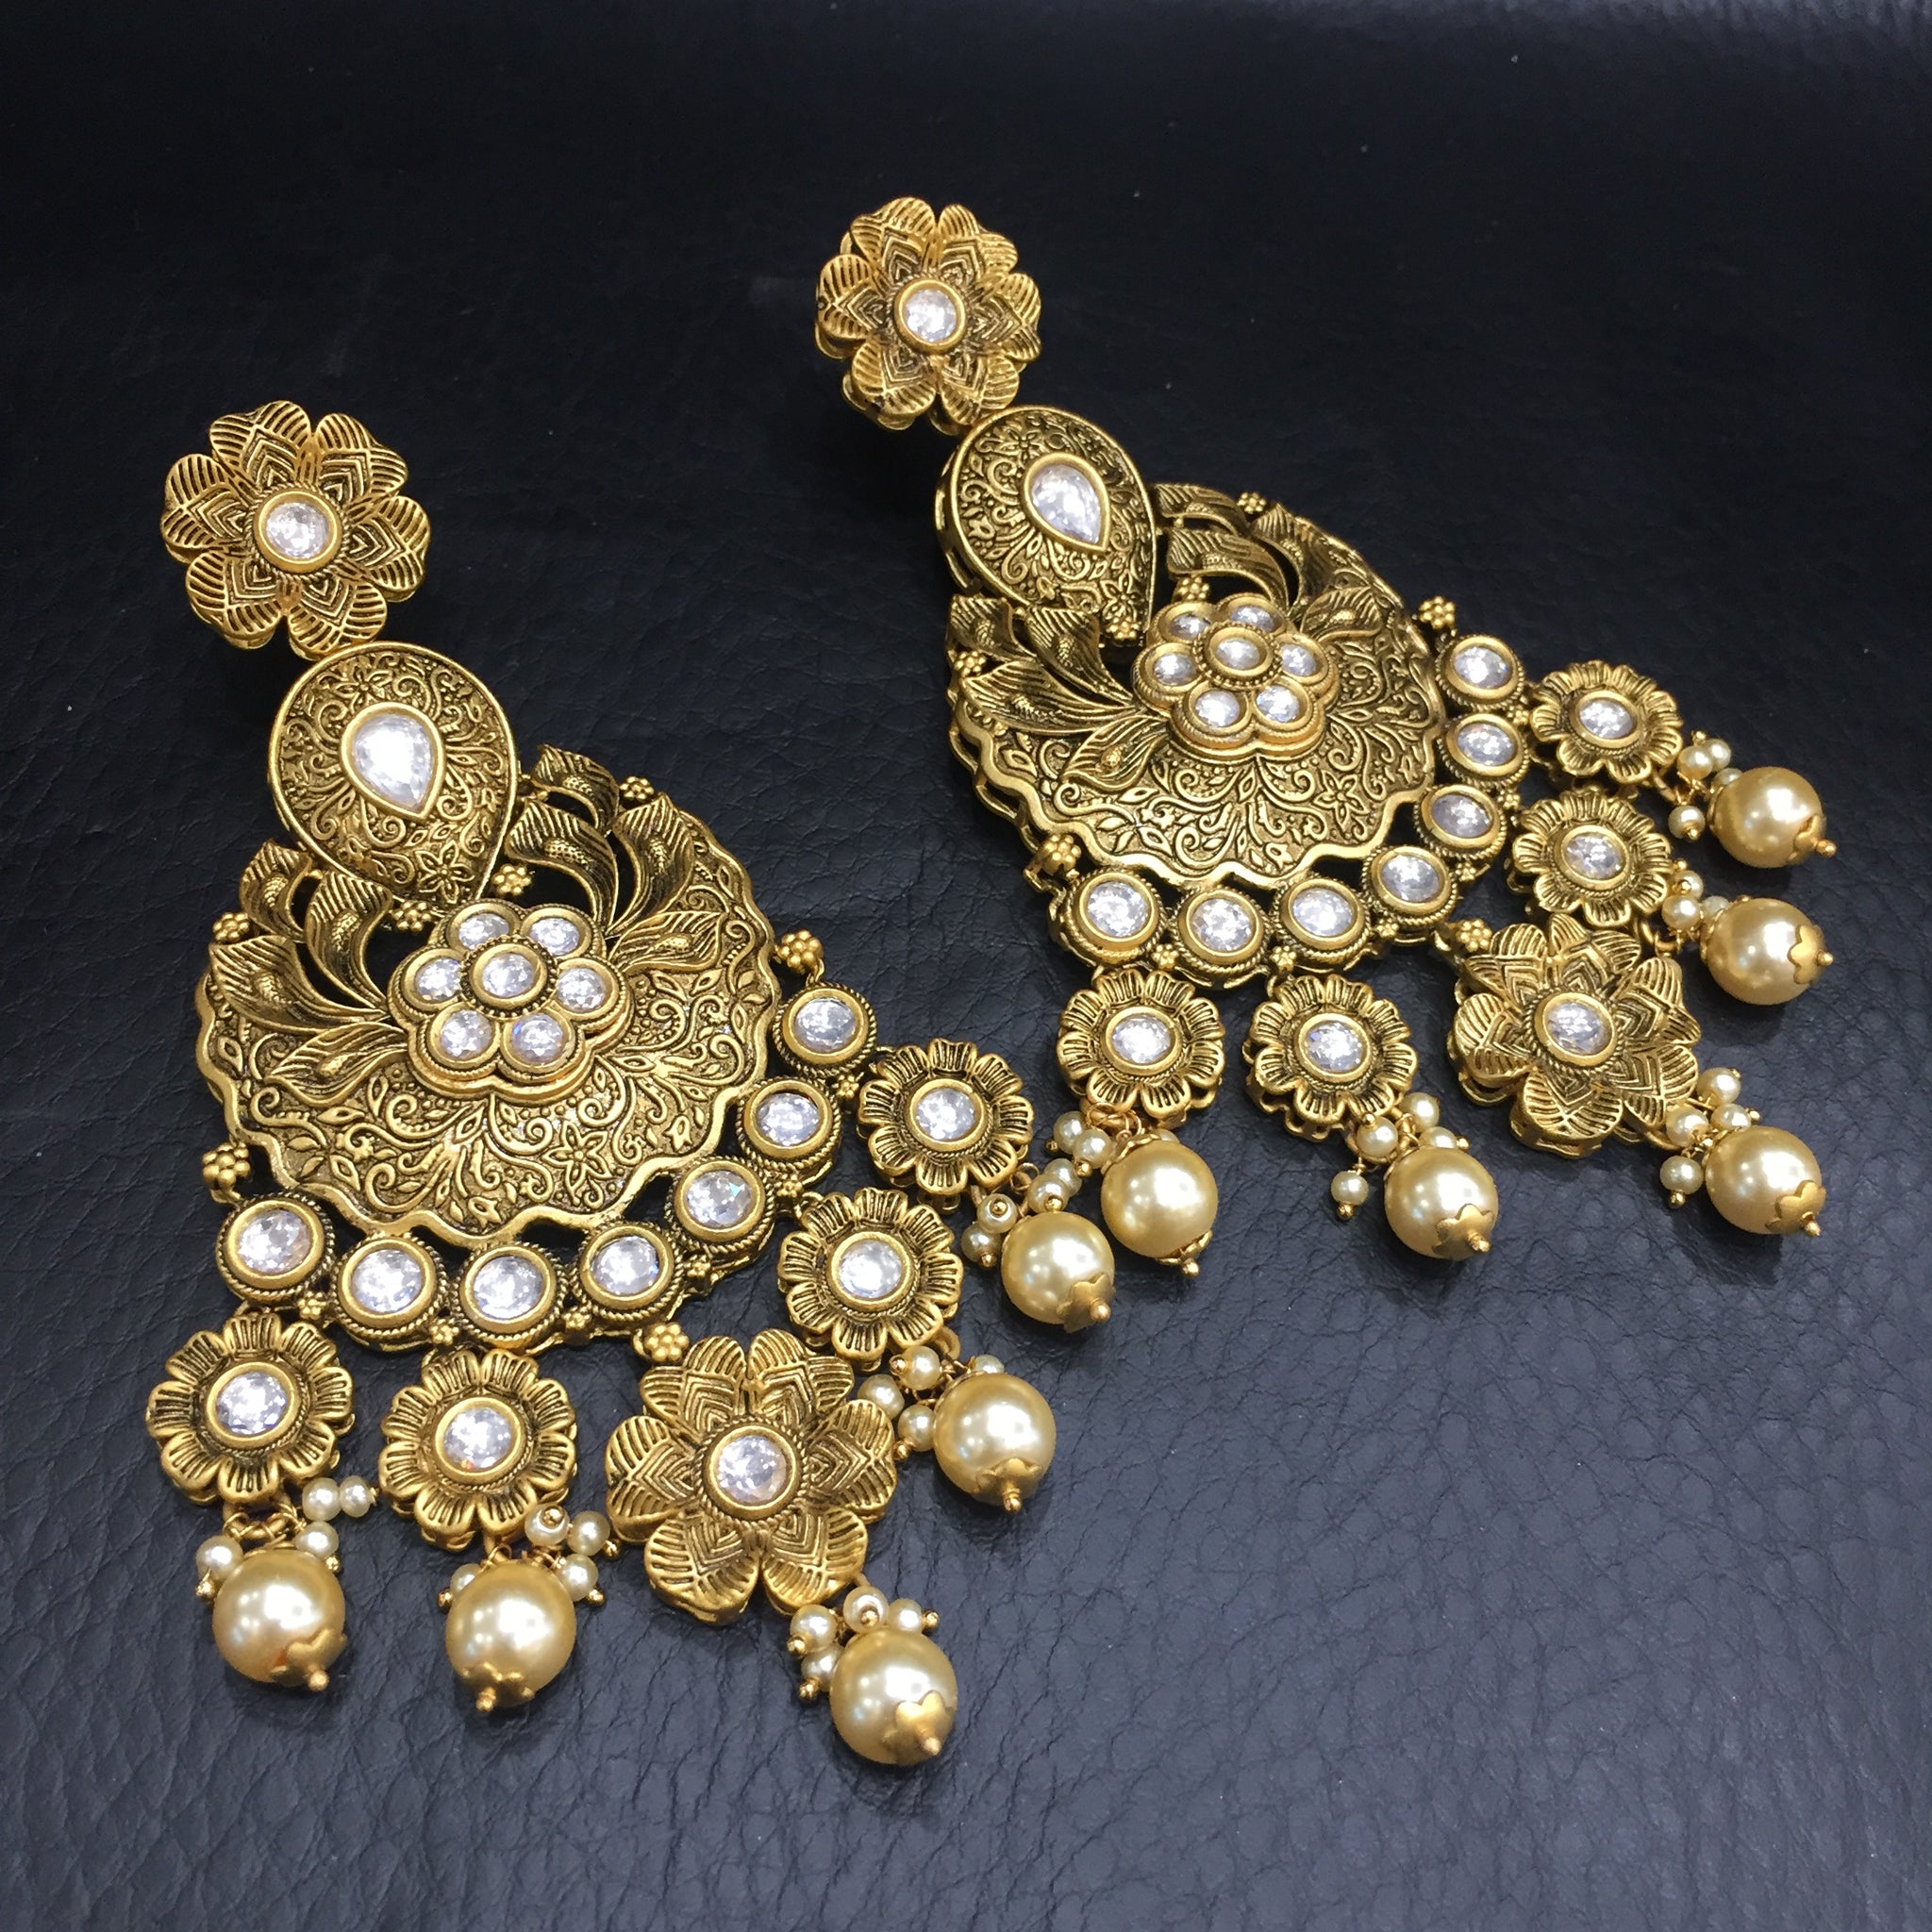 Antique Gold Plated Bridal Earring 12899-9499 - Dazzles Jewellery